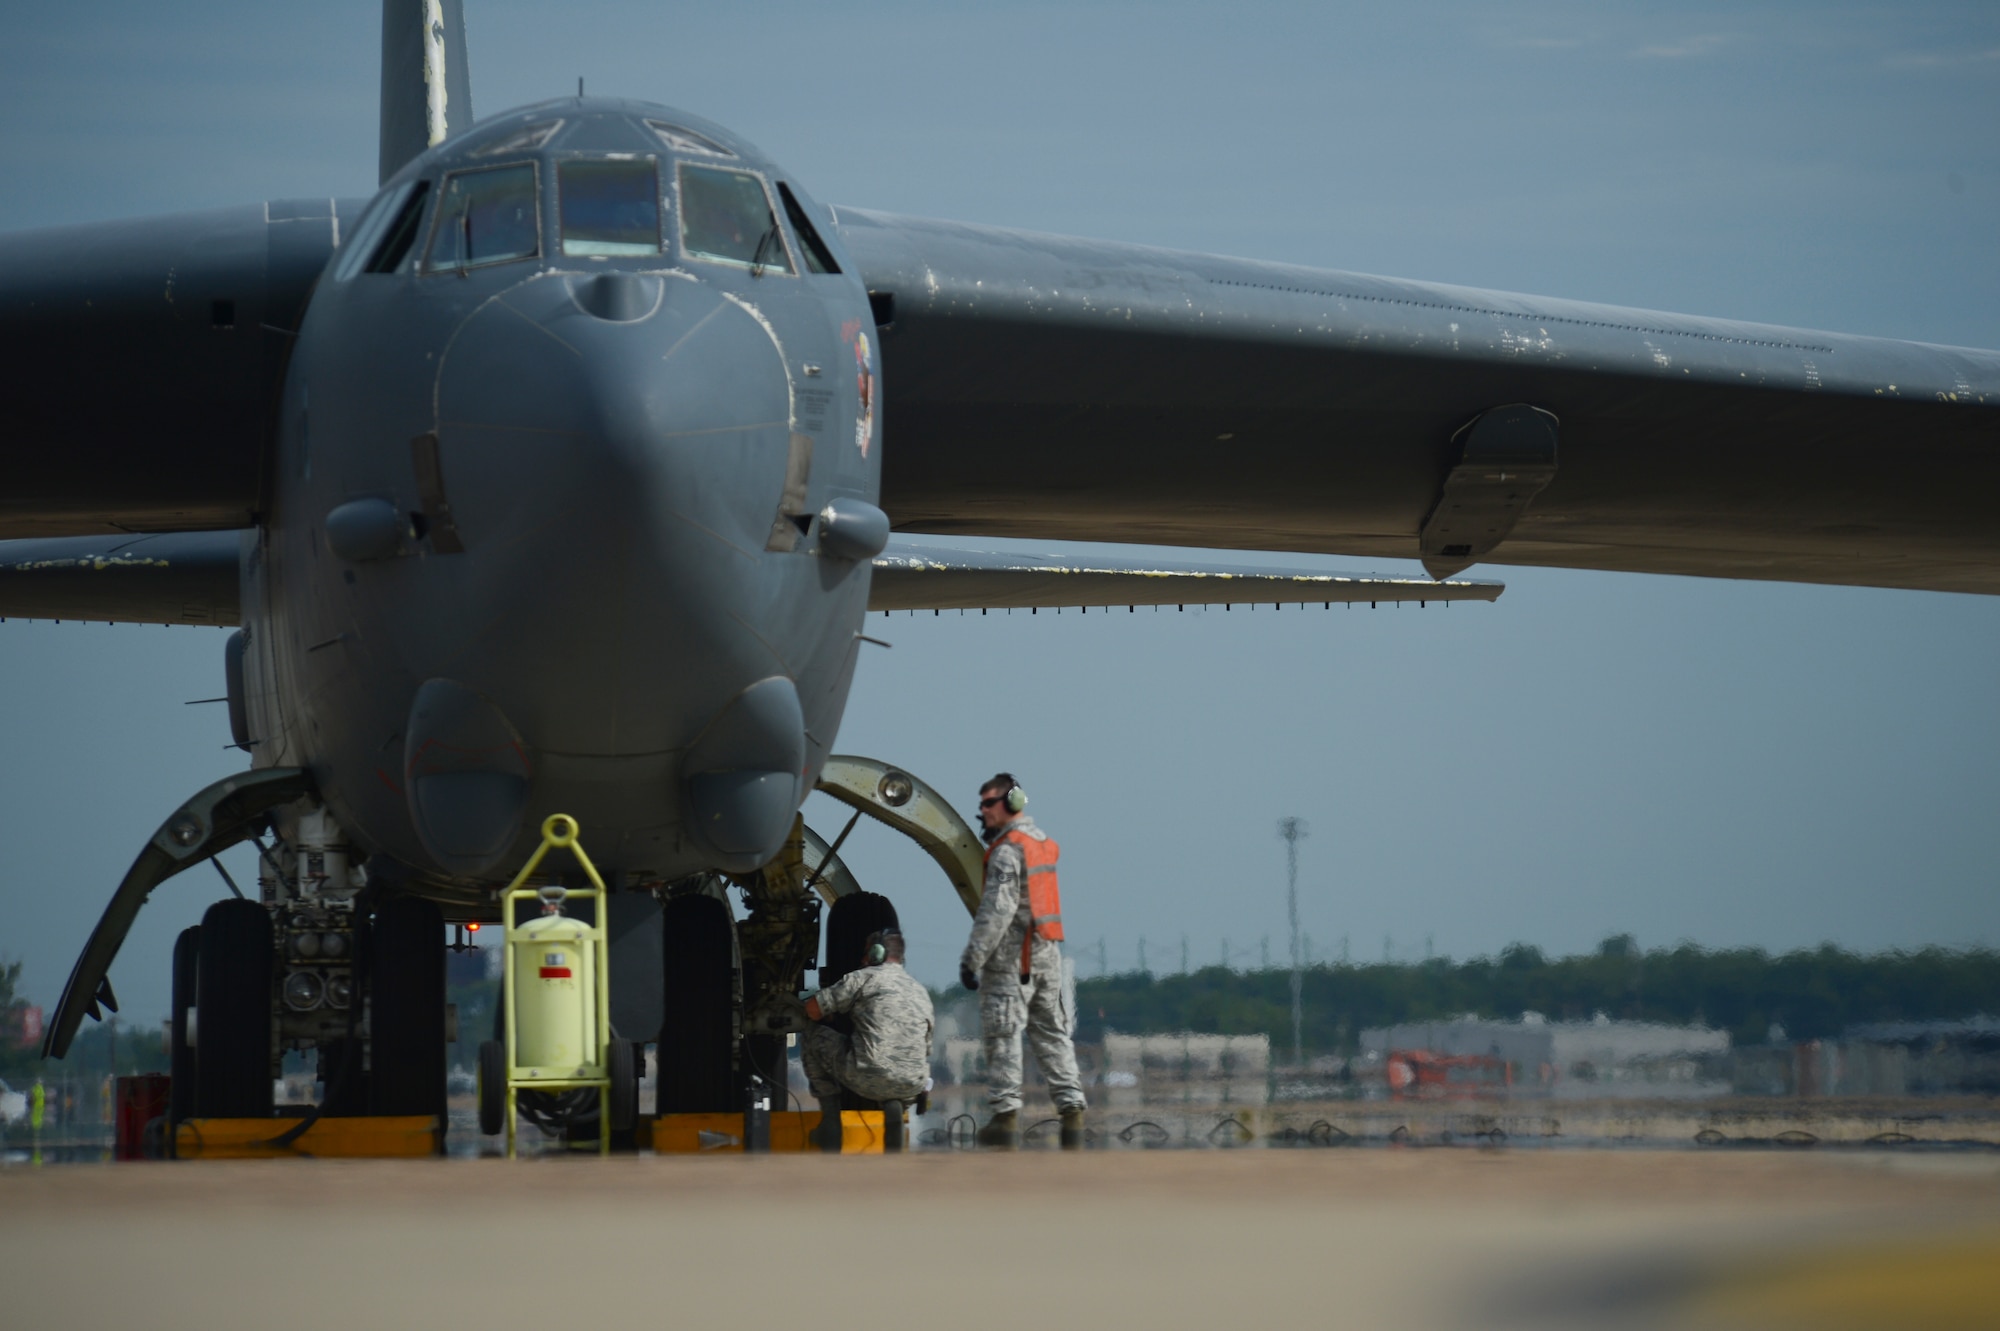 Tech. Sgt. Michael Zeigler, 96th Aircraft Maintenance Unit, and Staff Sgt. Aaron McCullum, 2nd Aircraft Maintenance Squadron, prepare to launch a B-52H Stratofortress on Barksdale Air Force Base, La., July 16, 2013. The B-52 was sent to Tinker Air Force Base, Okla., to receive the first Combat Network Communications Technology upgrade. The change will allow aircrew to receive real-time intelligence updates. (U.S. Air Force photo/Senior Airman Micaiah Anthony) 